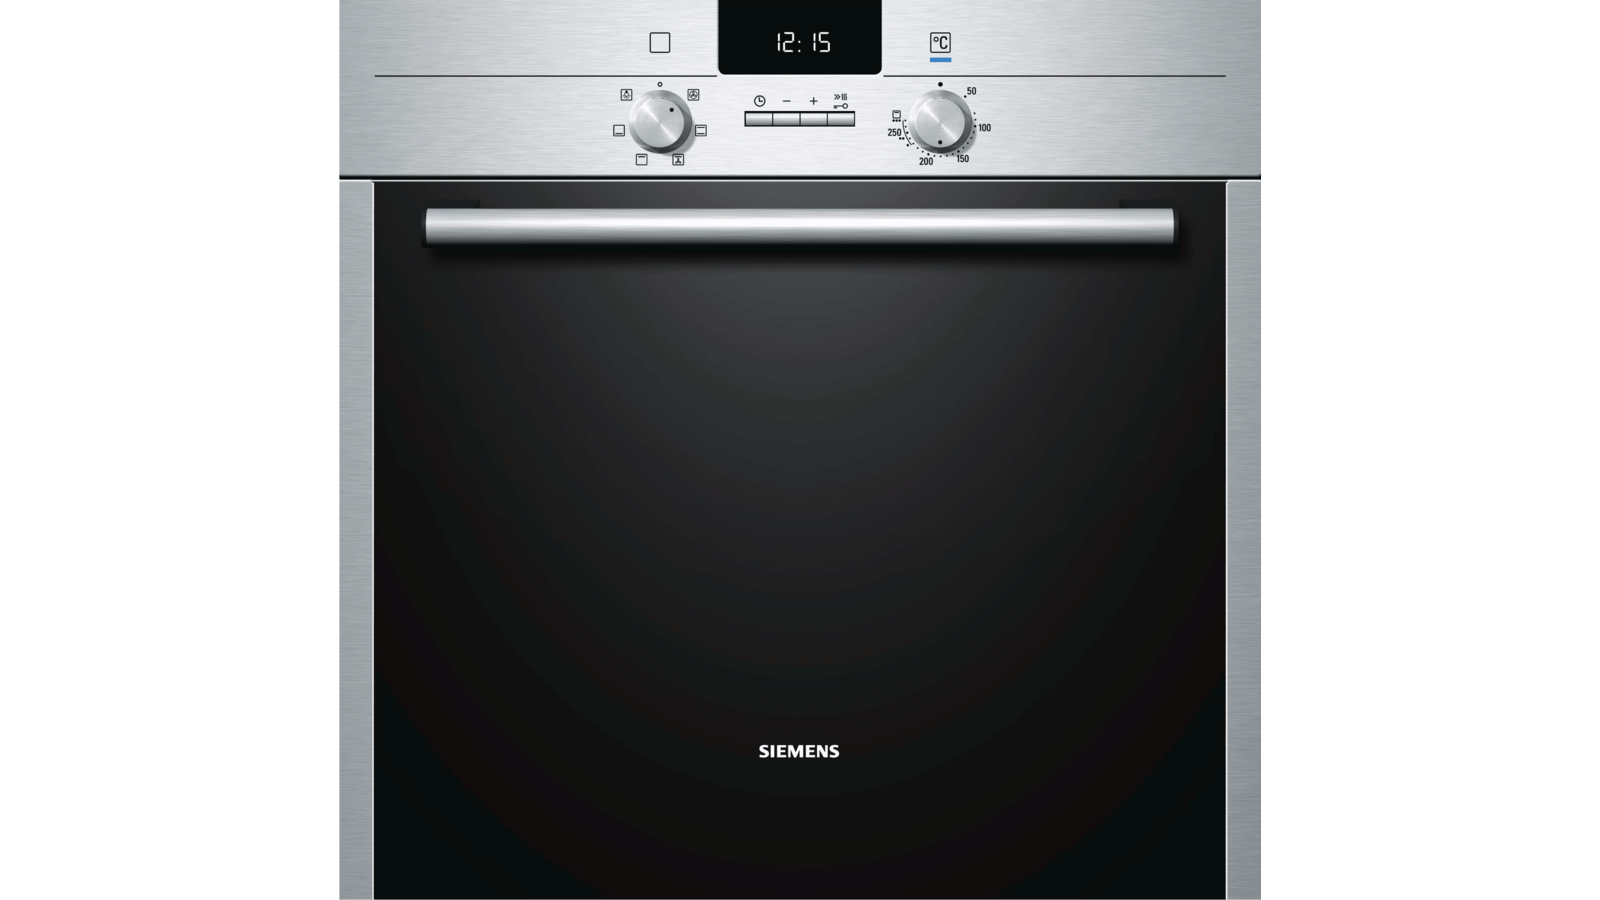 550 cm wide electric cookers